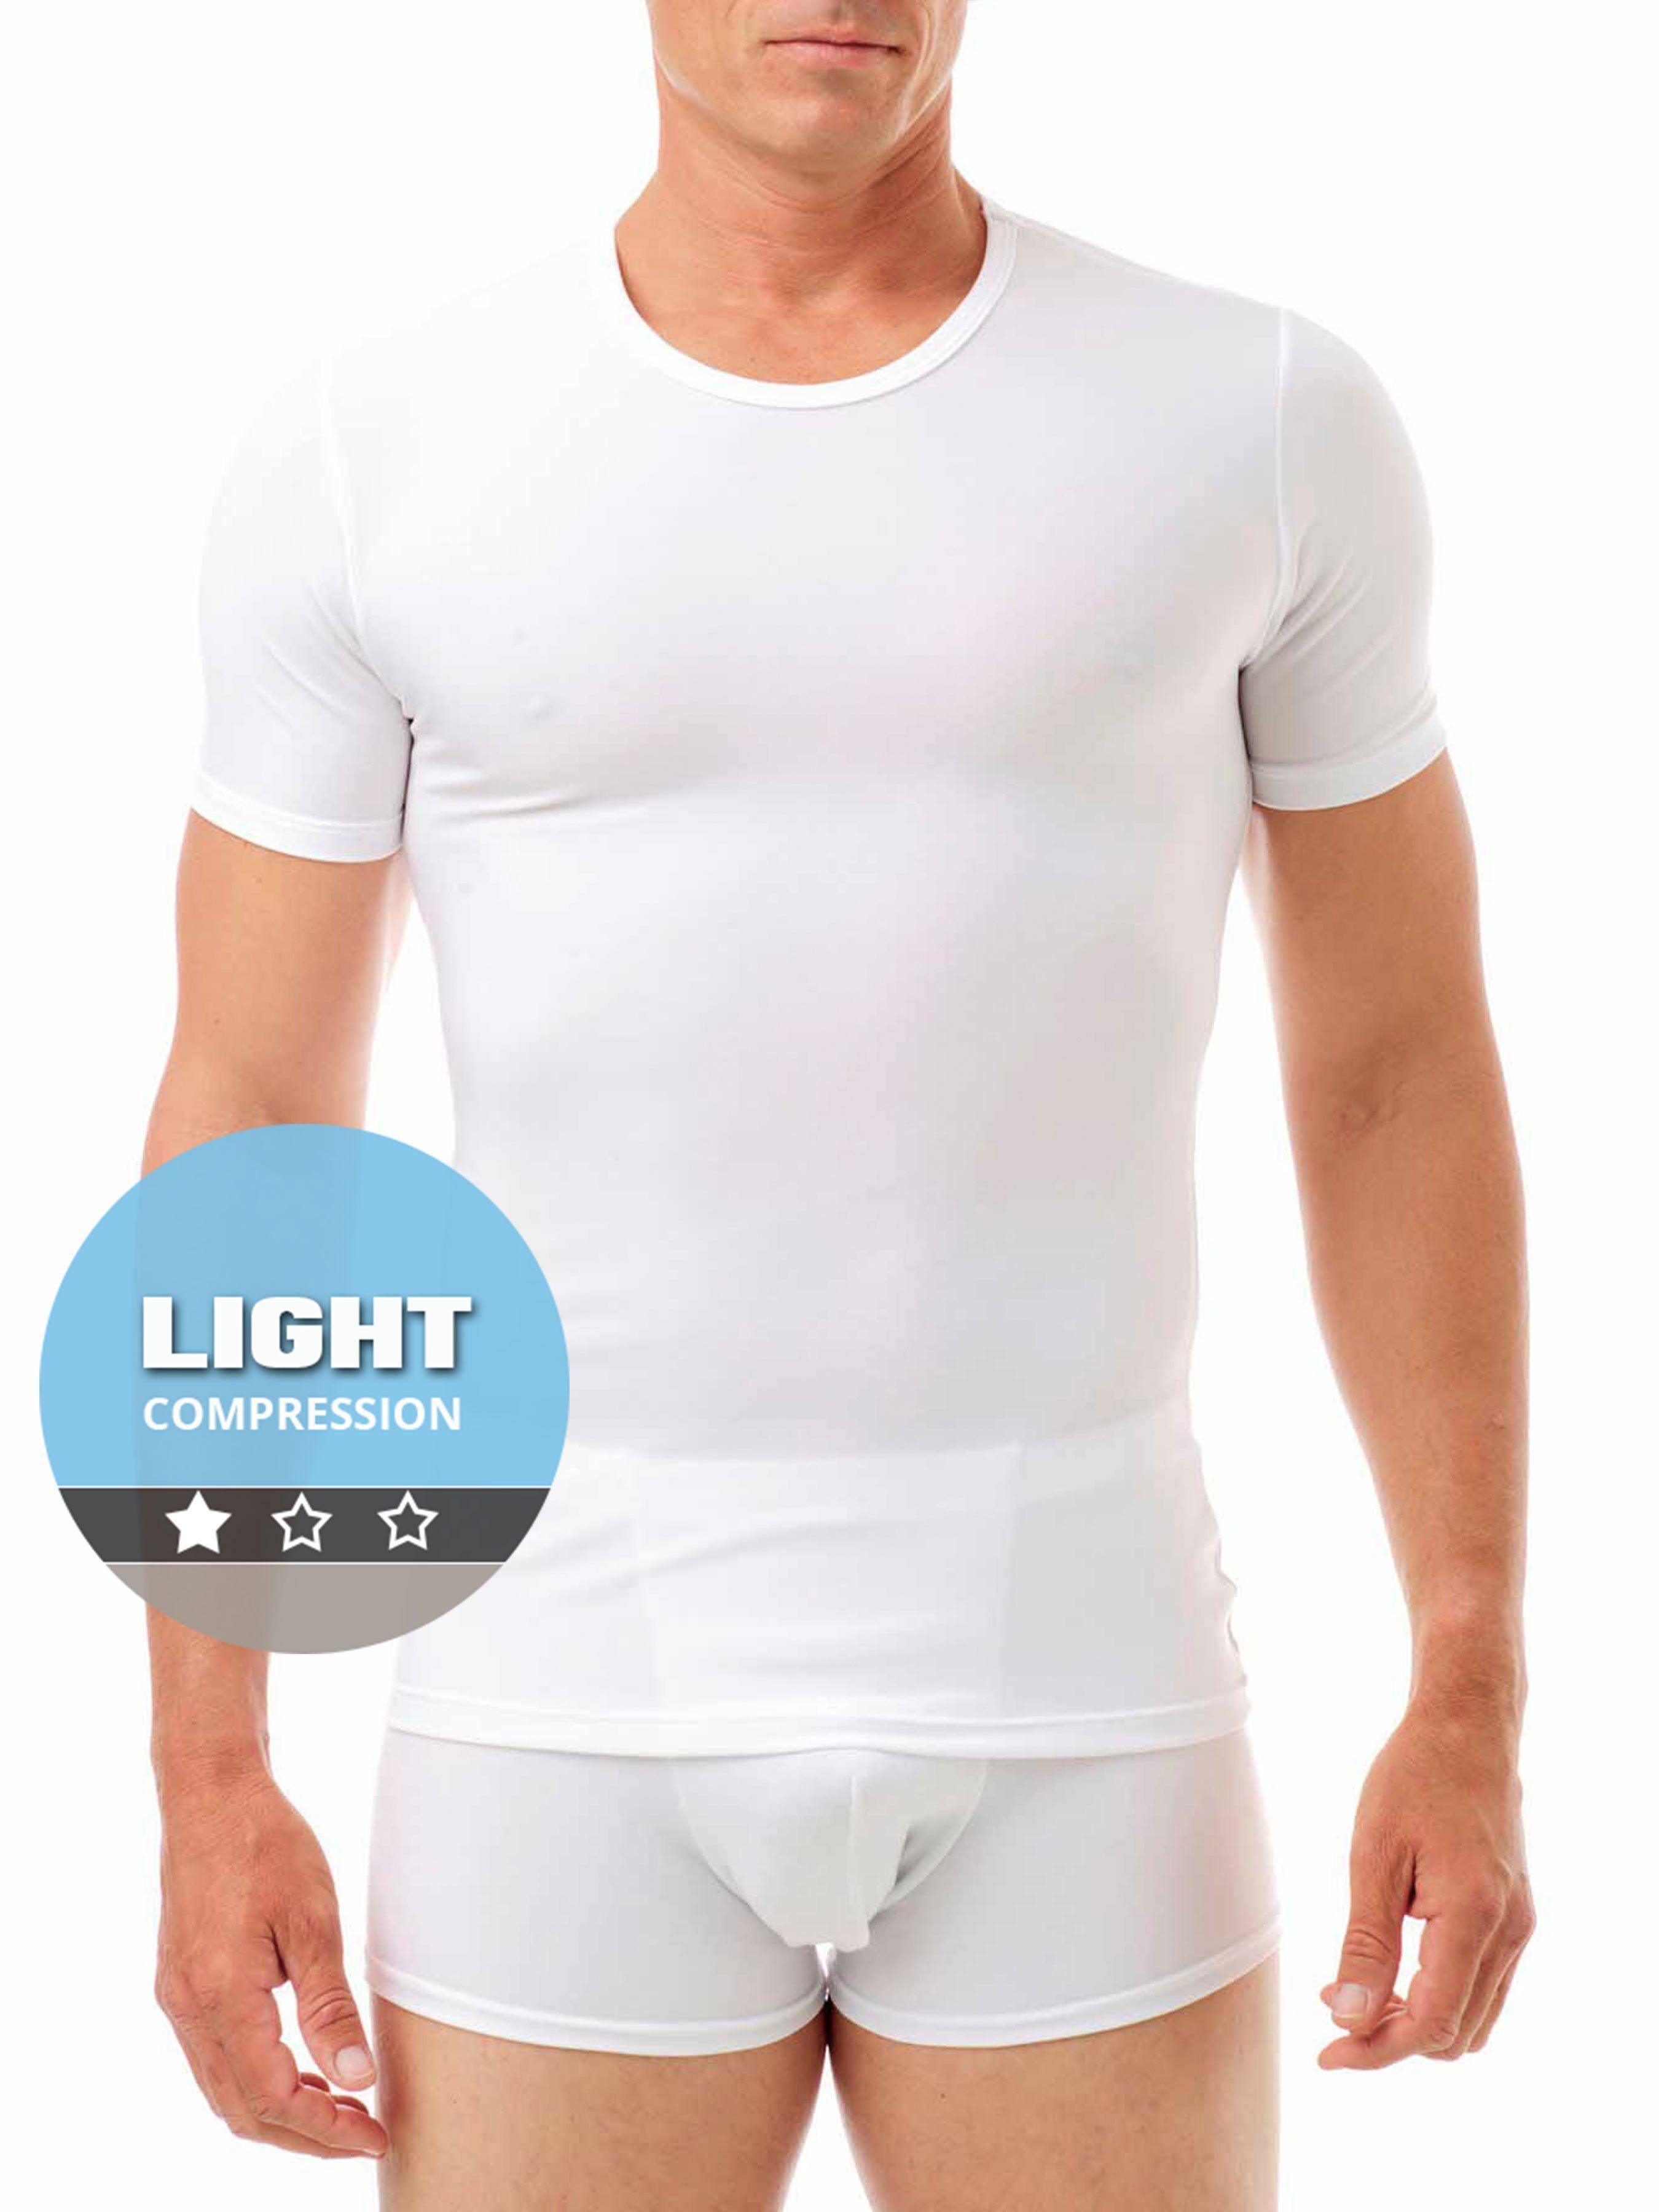 Powerful body shaping T-shirt for a visibly sculpted look. Feels like ...